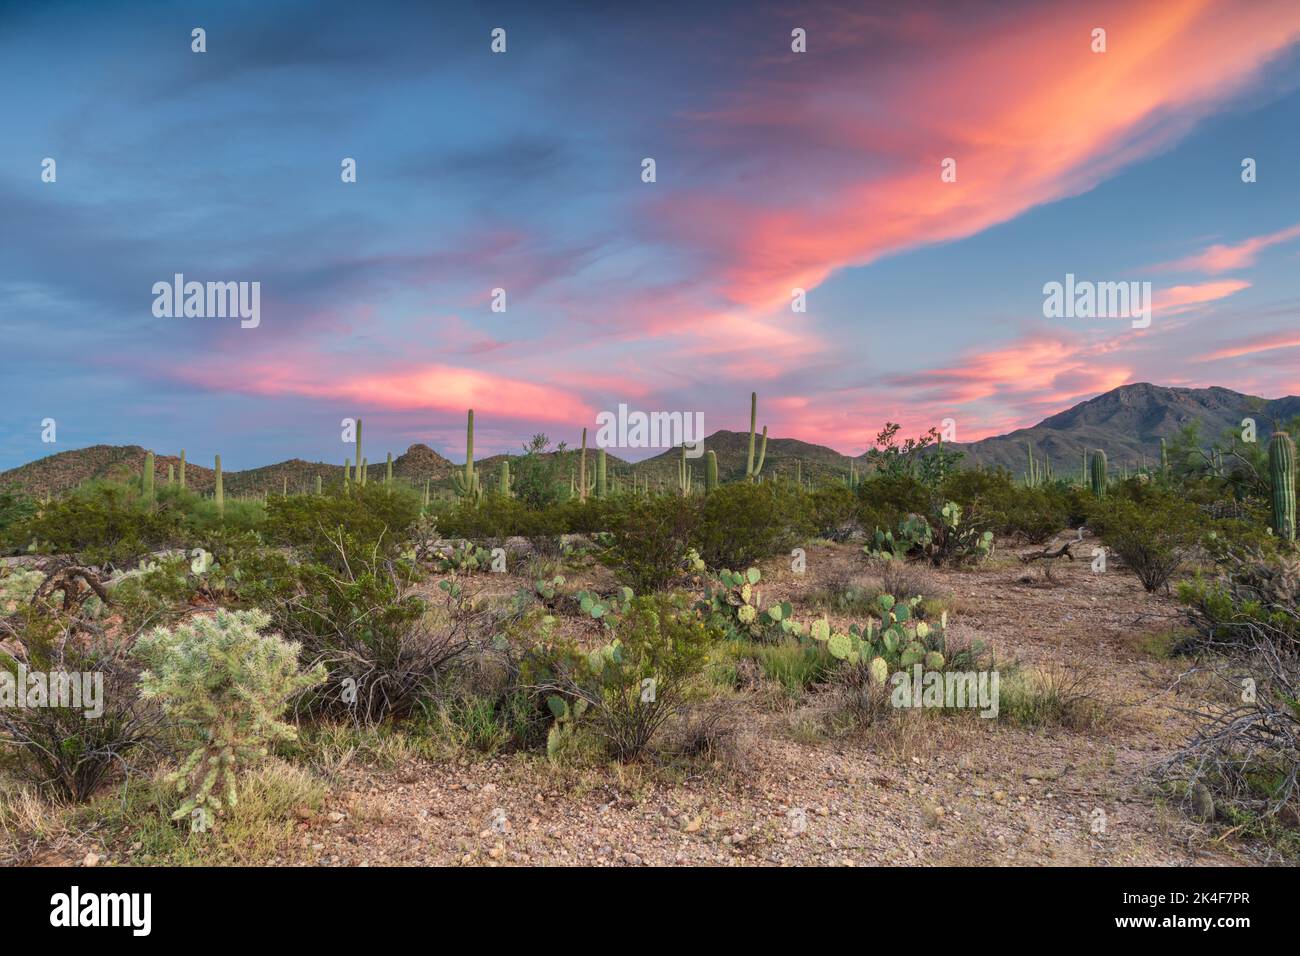 Arizona's Sonoran desert at dusk. Saguaro and other cactus cover the desert floor; Blue sky above filled with brilliant pink clouds. Stock Photo